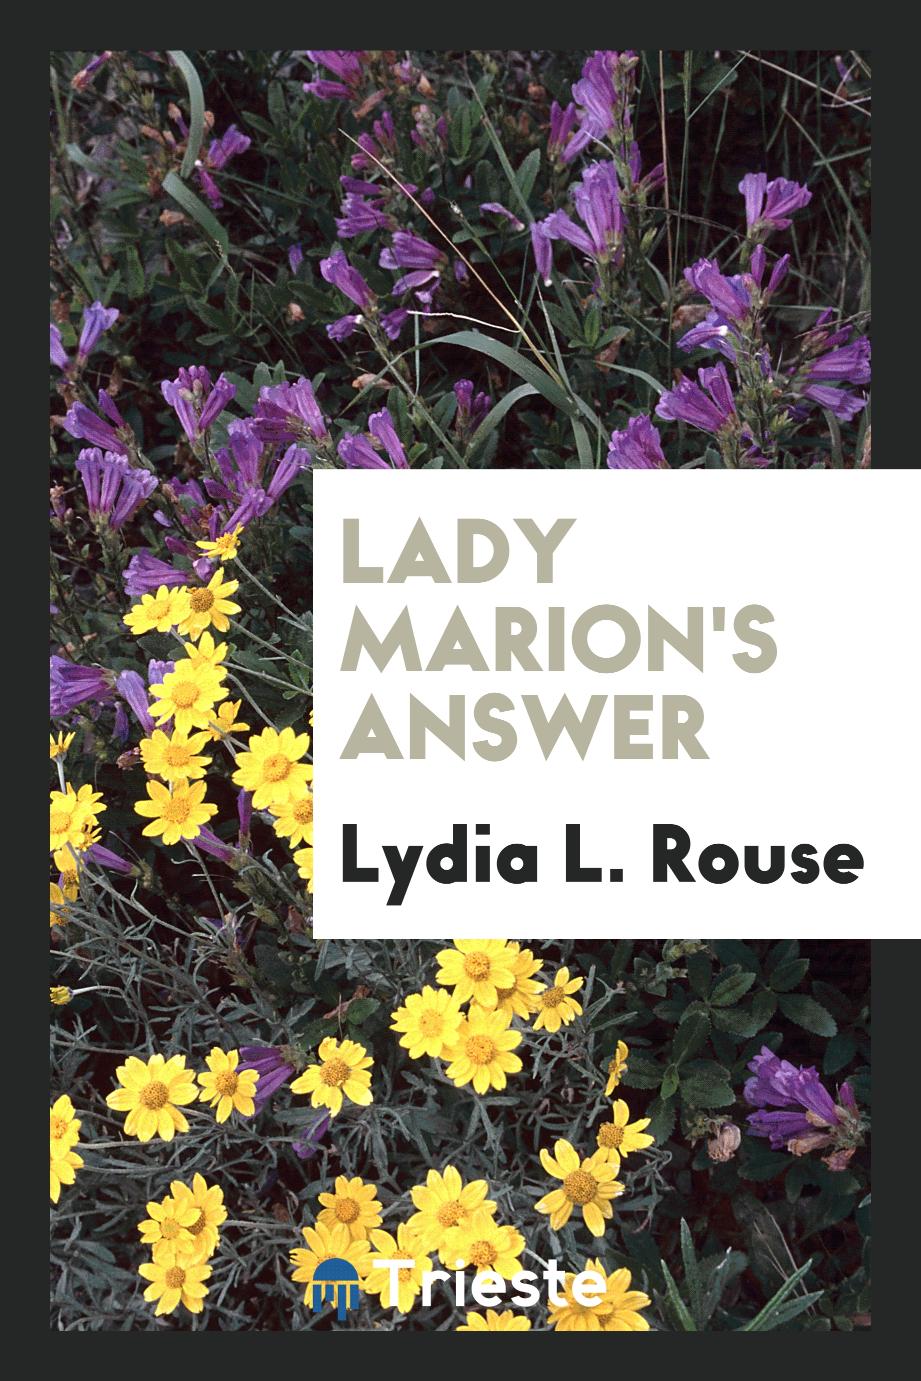 Lady Marion's answer